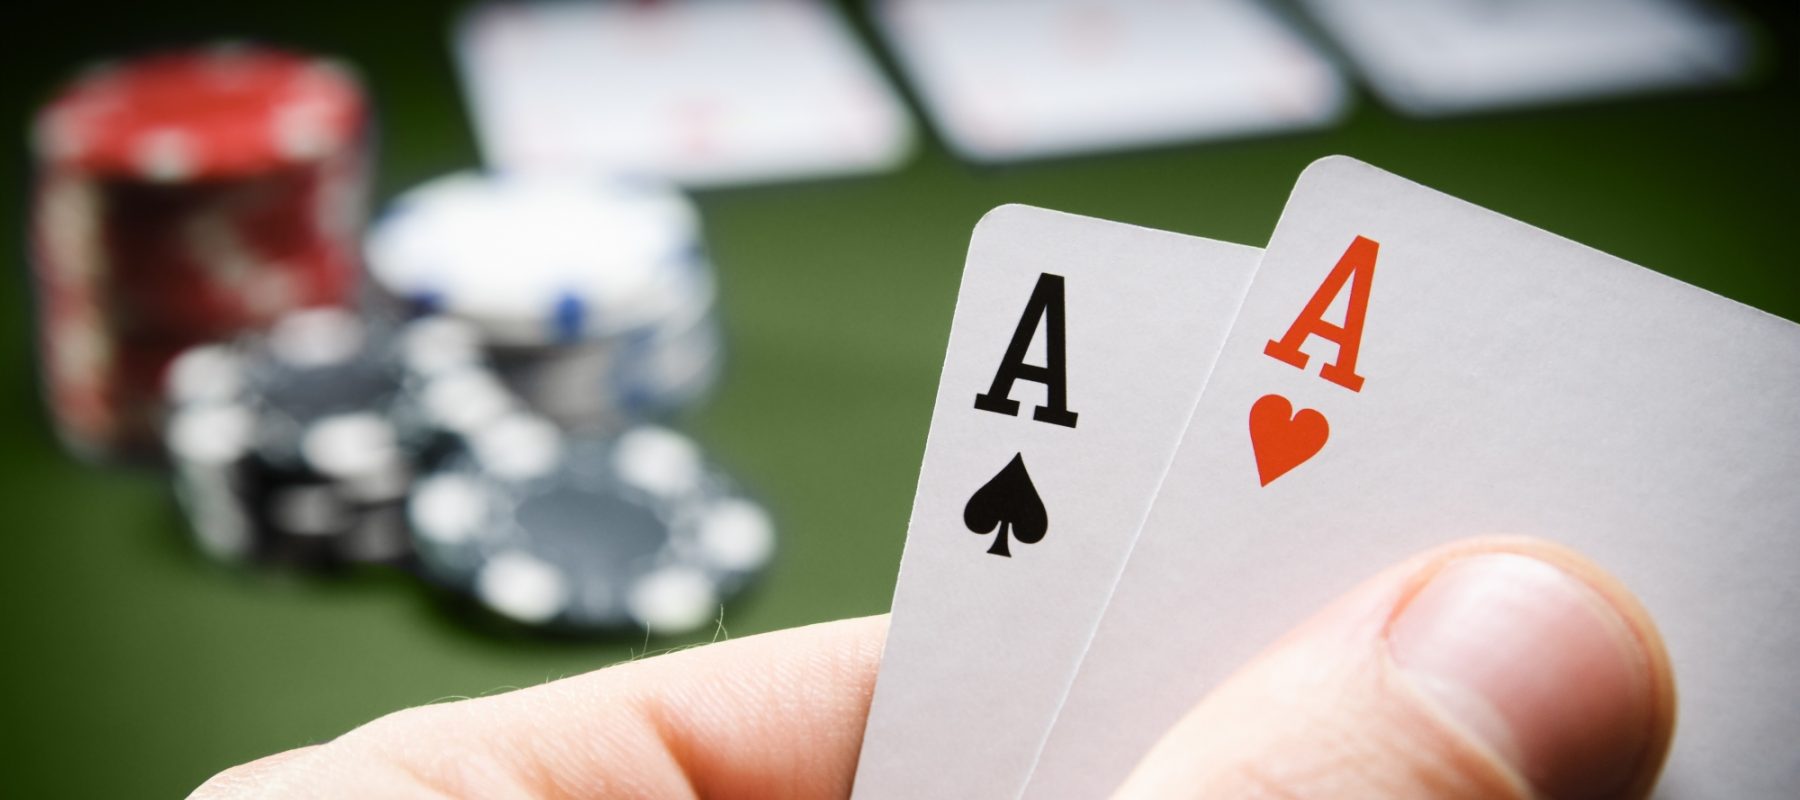 Choose the reliable source and enjoy playing the poker game online